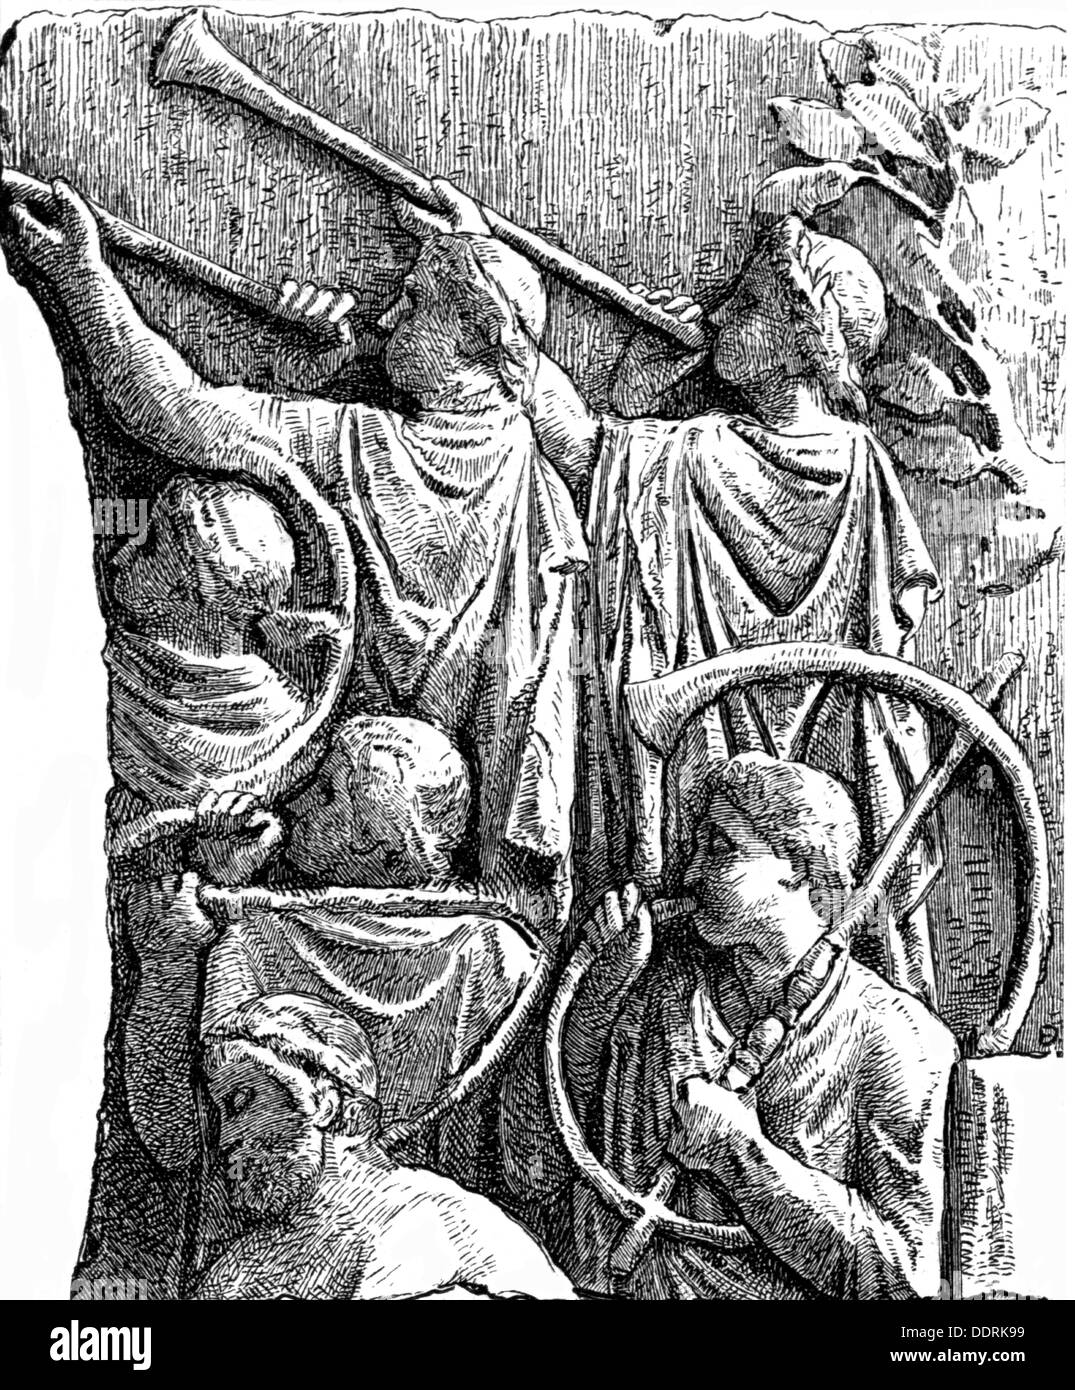 music,instruments,wind instruments,Roman blowers with Tuba and Bucina,after relief from the triumphal column of Emperor Marcus Ulpius Traianus,113 AD,wood engraving,19th century,Trajan's Column,Trajan,Roman,Romans,ancient world,ancient times,Roman Empire,musical instrument,musical instruments,key,keys,brass instrument,brass instruments,aerophone,bucinator,2nd century,people,men,man,male,wind instruments,wind instrument,blower,blowers,tuba,tubas,triumphal column,triumphal columns,emperor,emperors,historic,historical,ancien,Additional-Rights-Clearences-Not Available Stock Photo